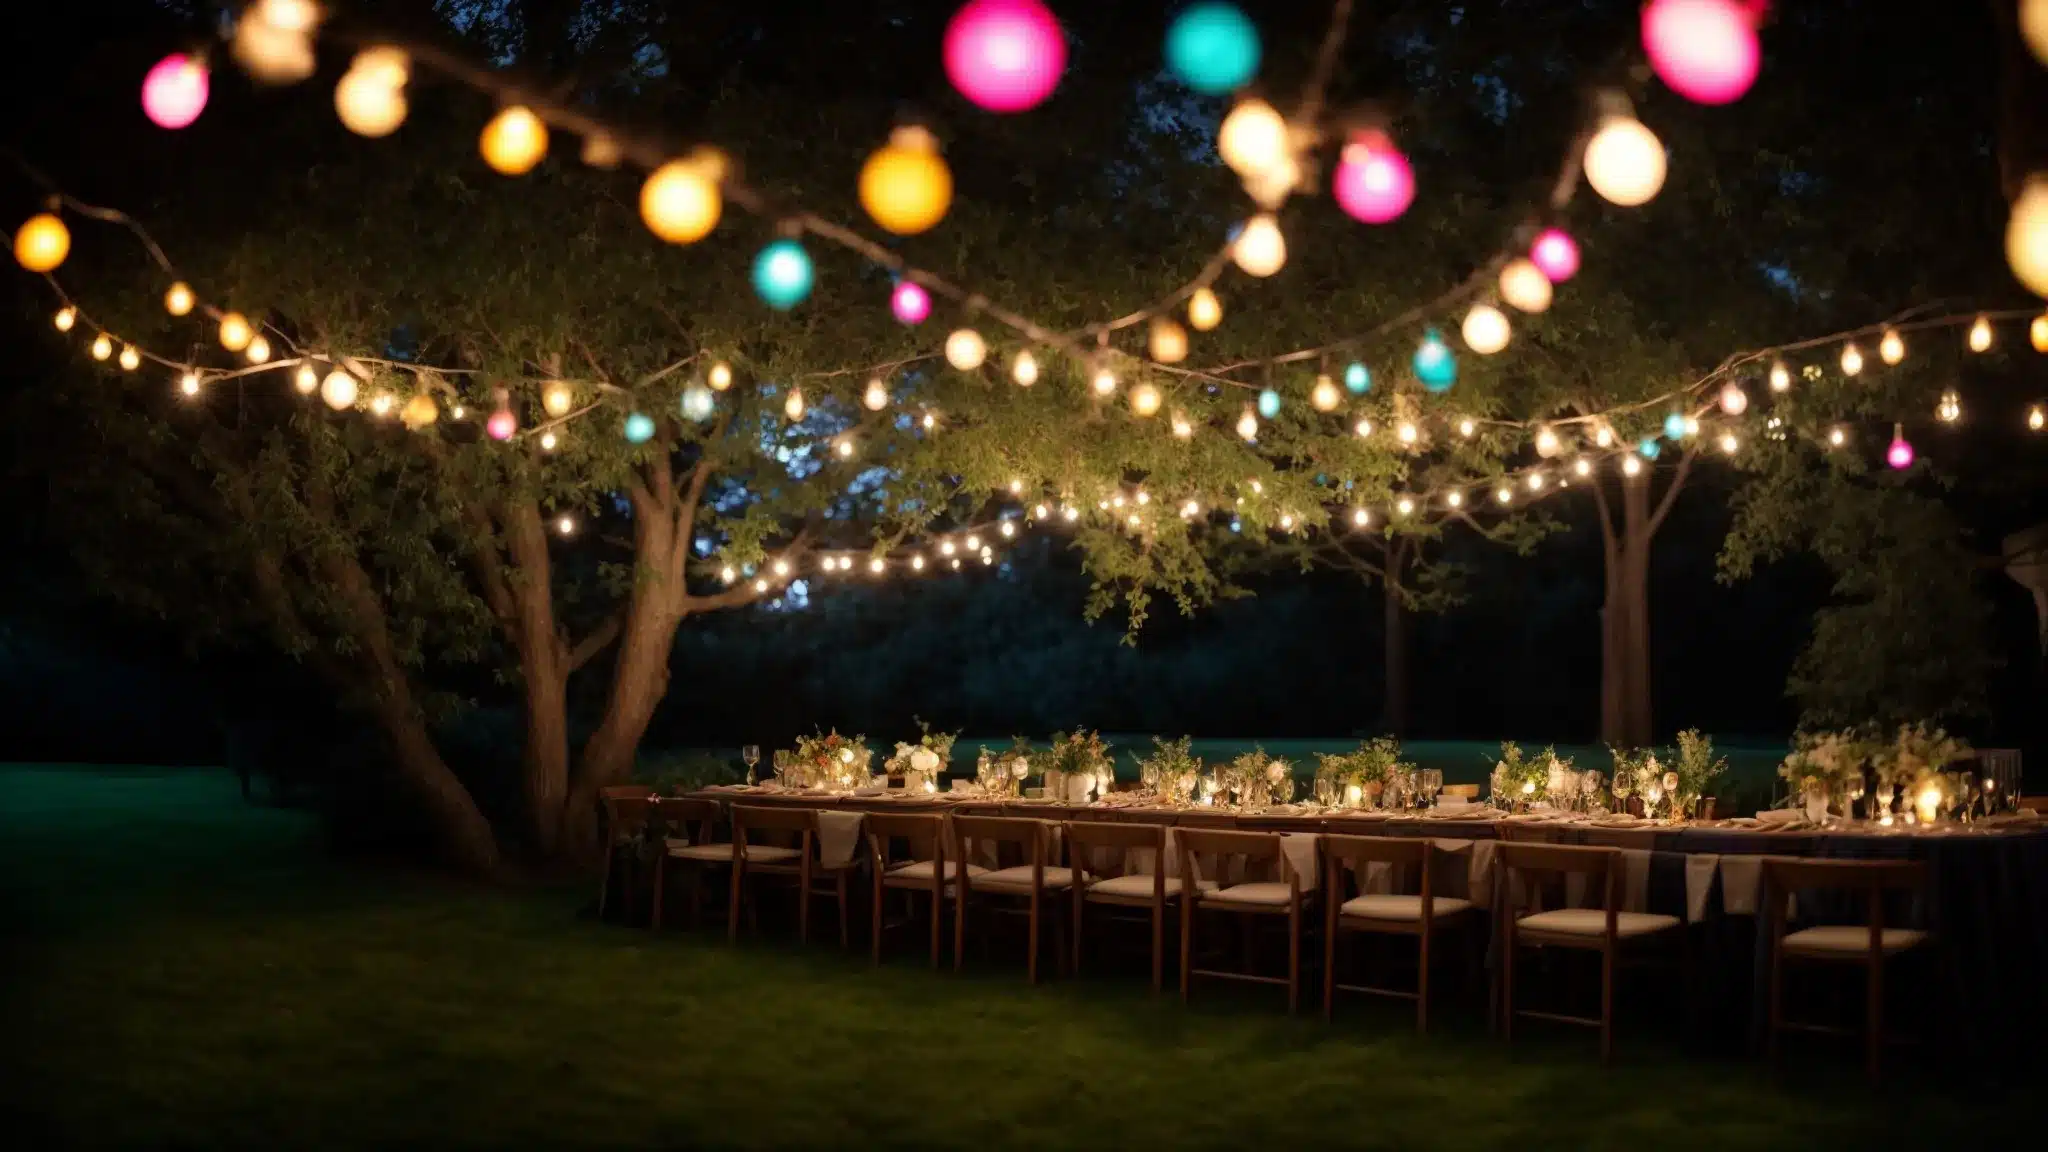 colorful bulb lights intertwine with tree branches above a garden party, casting a cheerful glow onto guests.